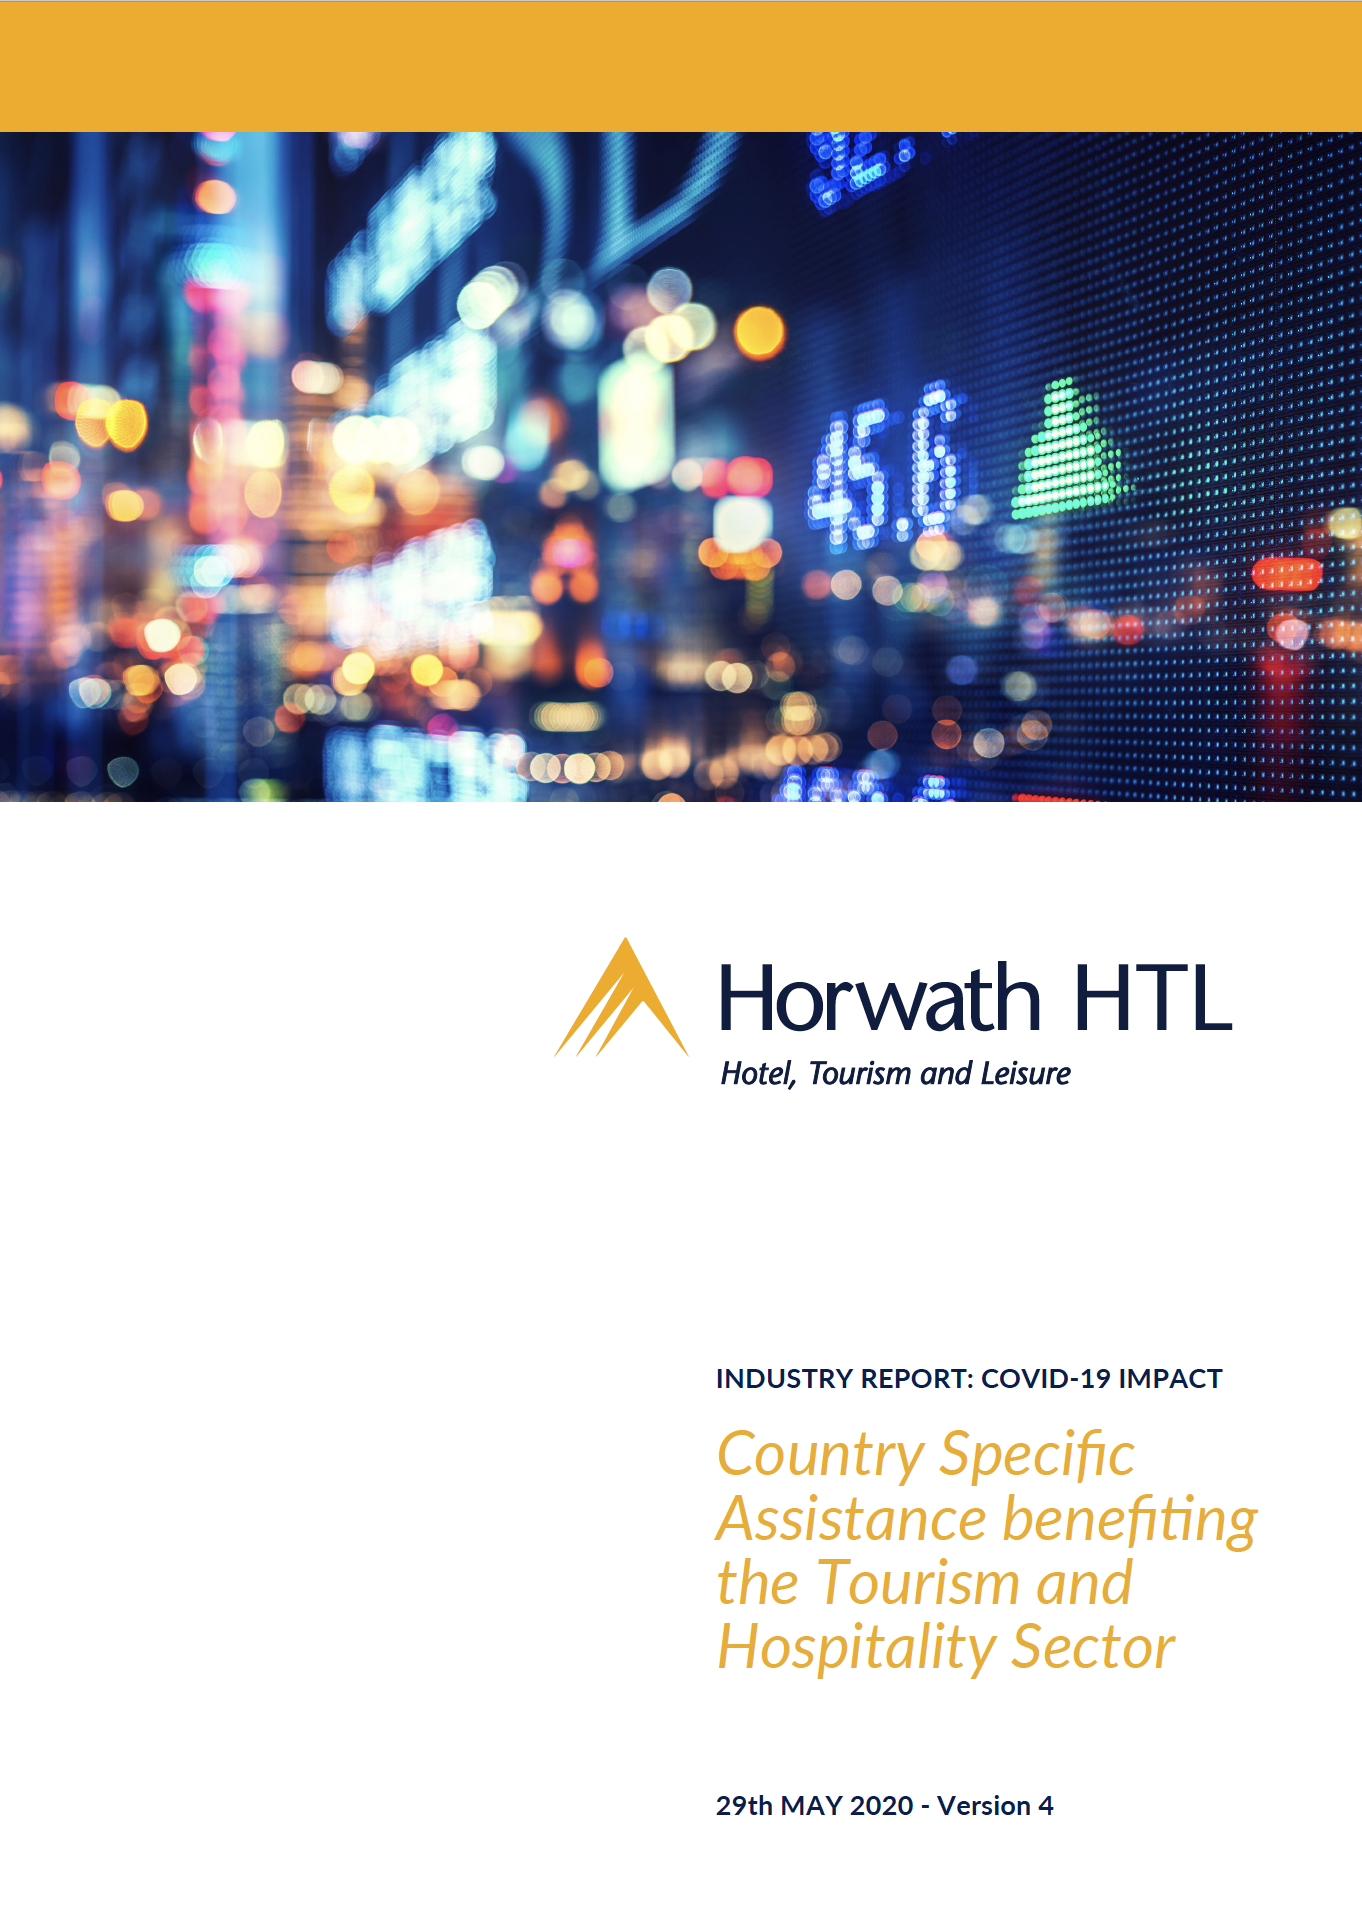 Updated! Tourism & Hospitality Sector Assistance (V.4)